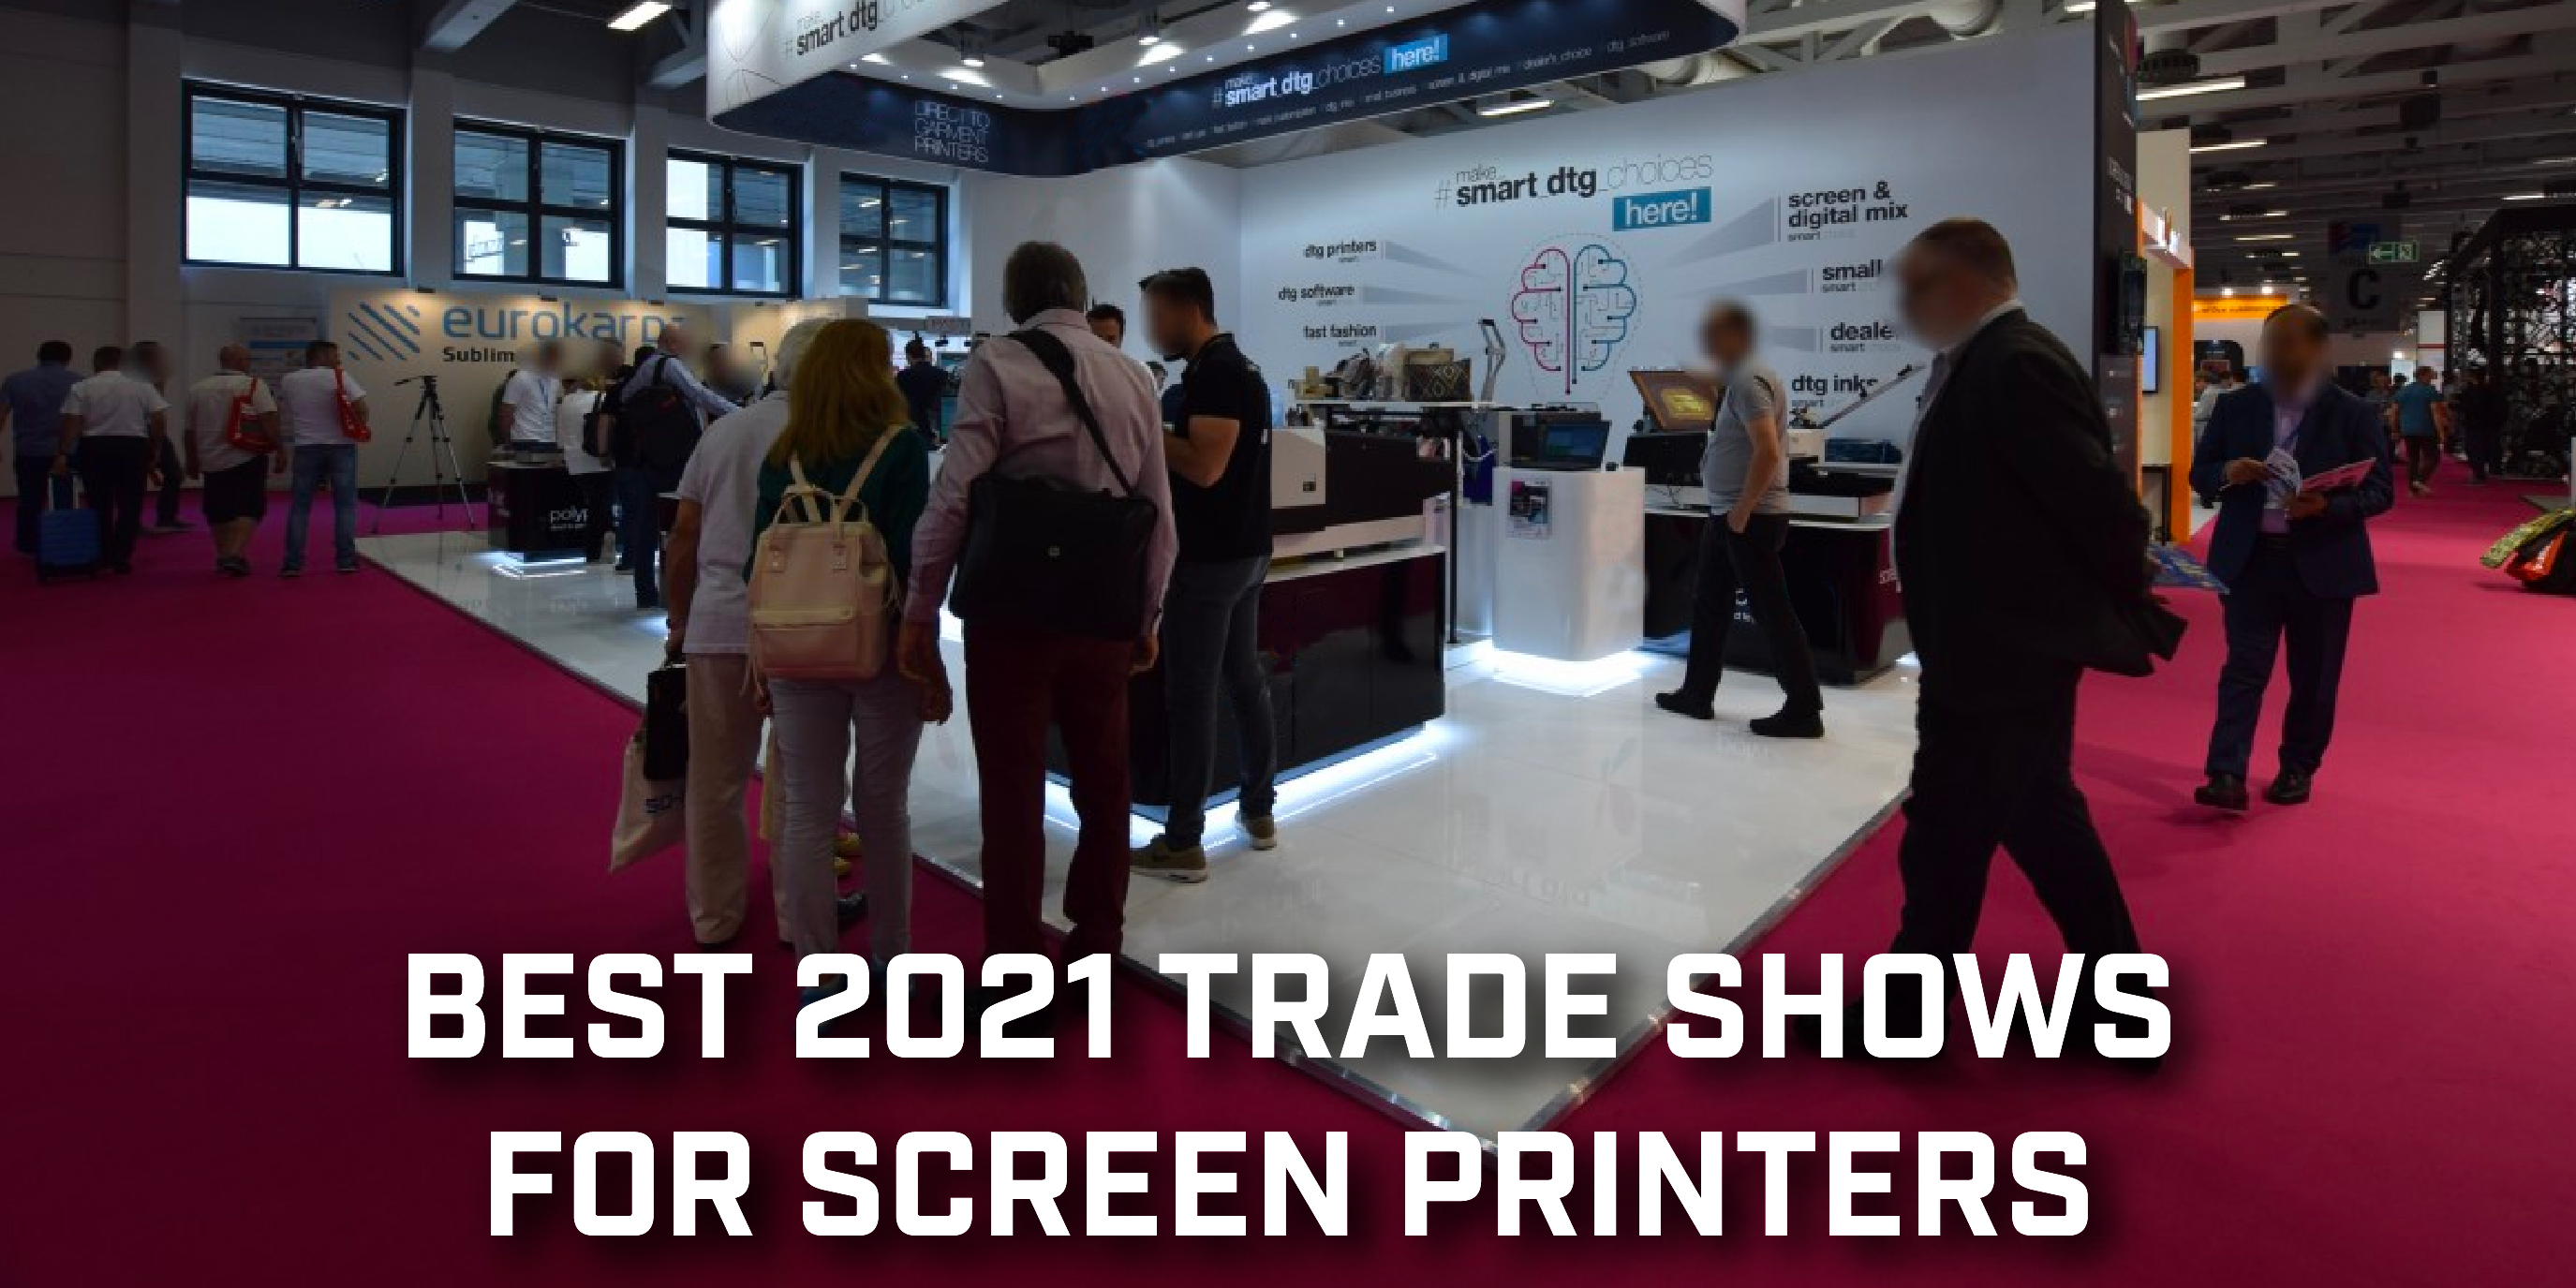 Best 2021 Trade Shows for Screen Printers The Vector Art Experts